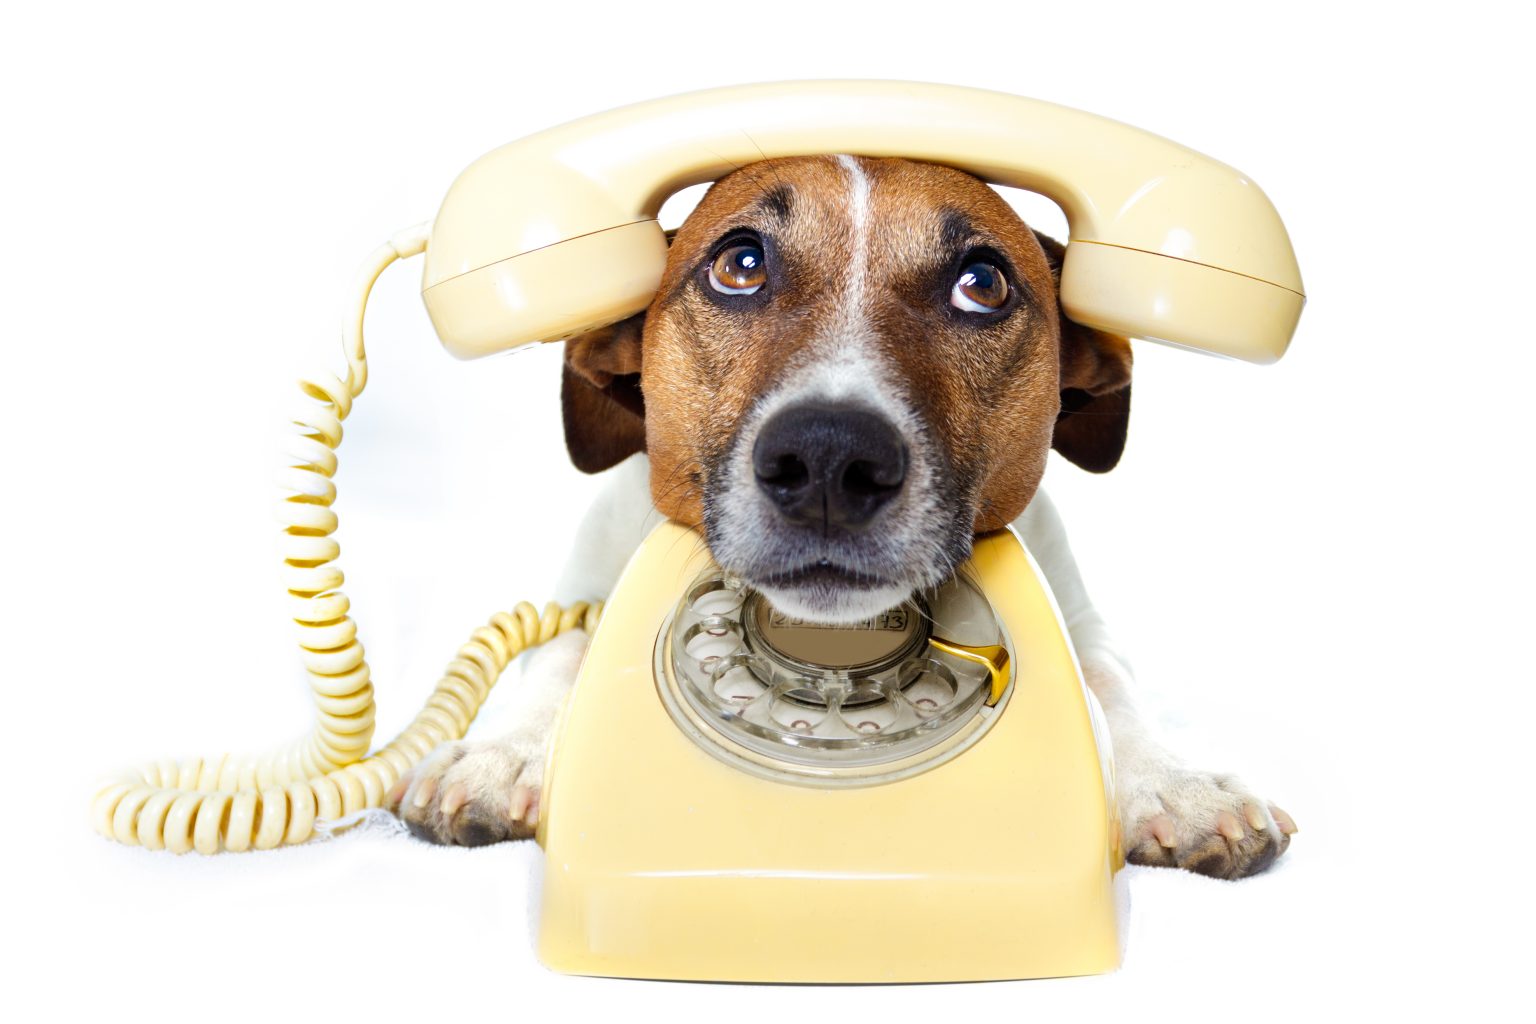 Dog using a yellow phone